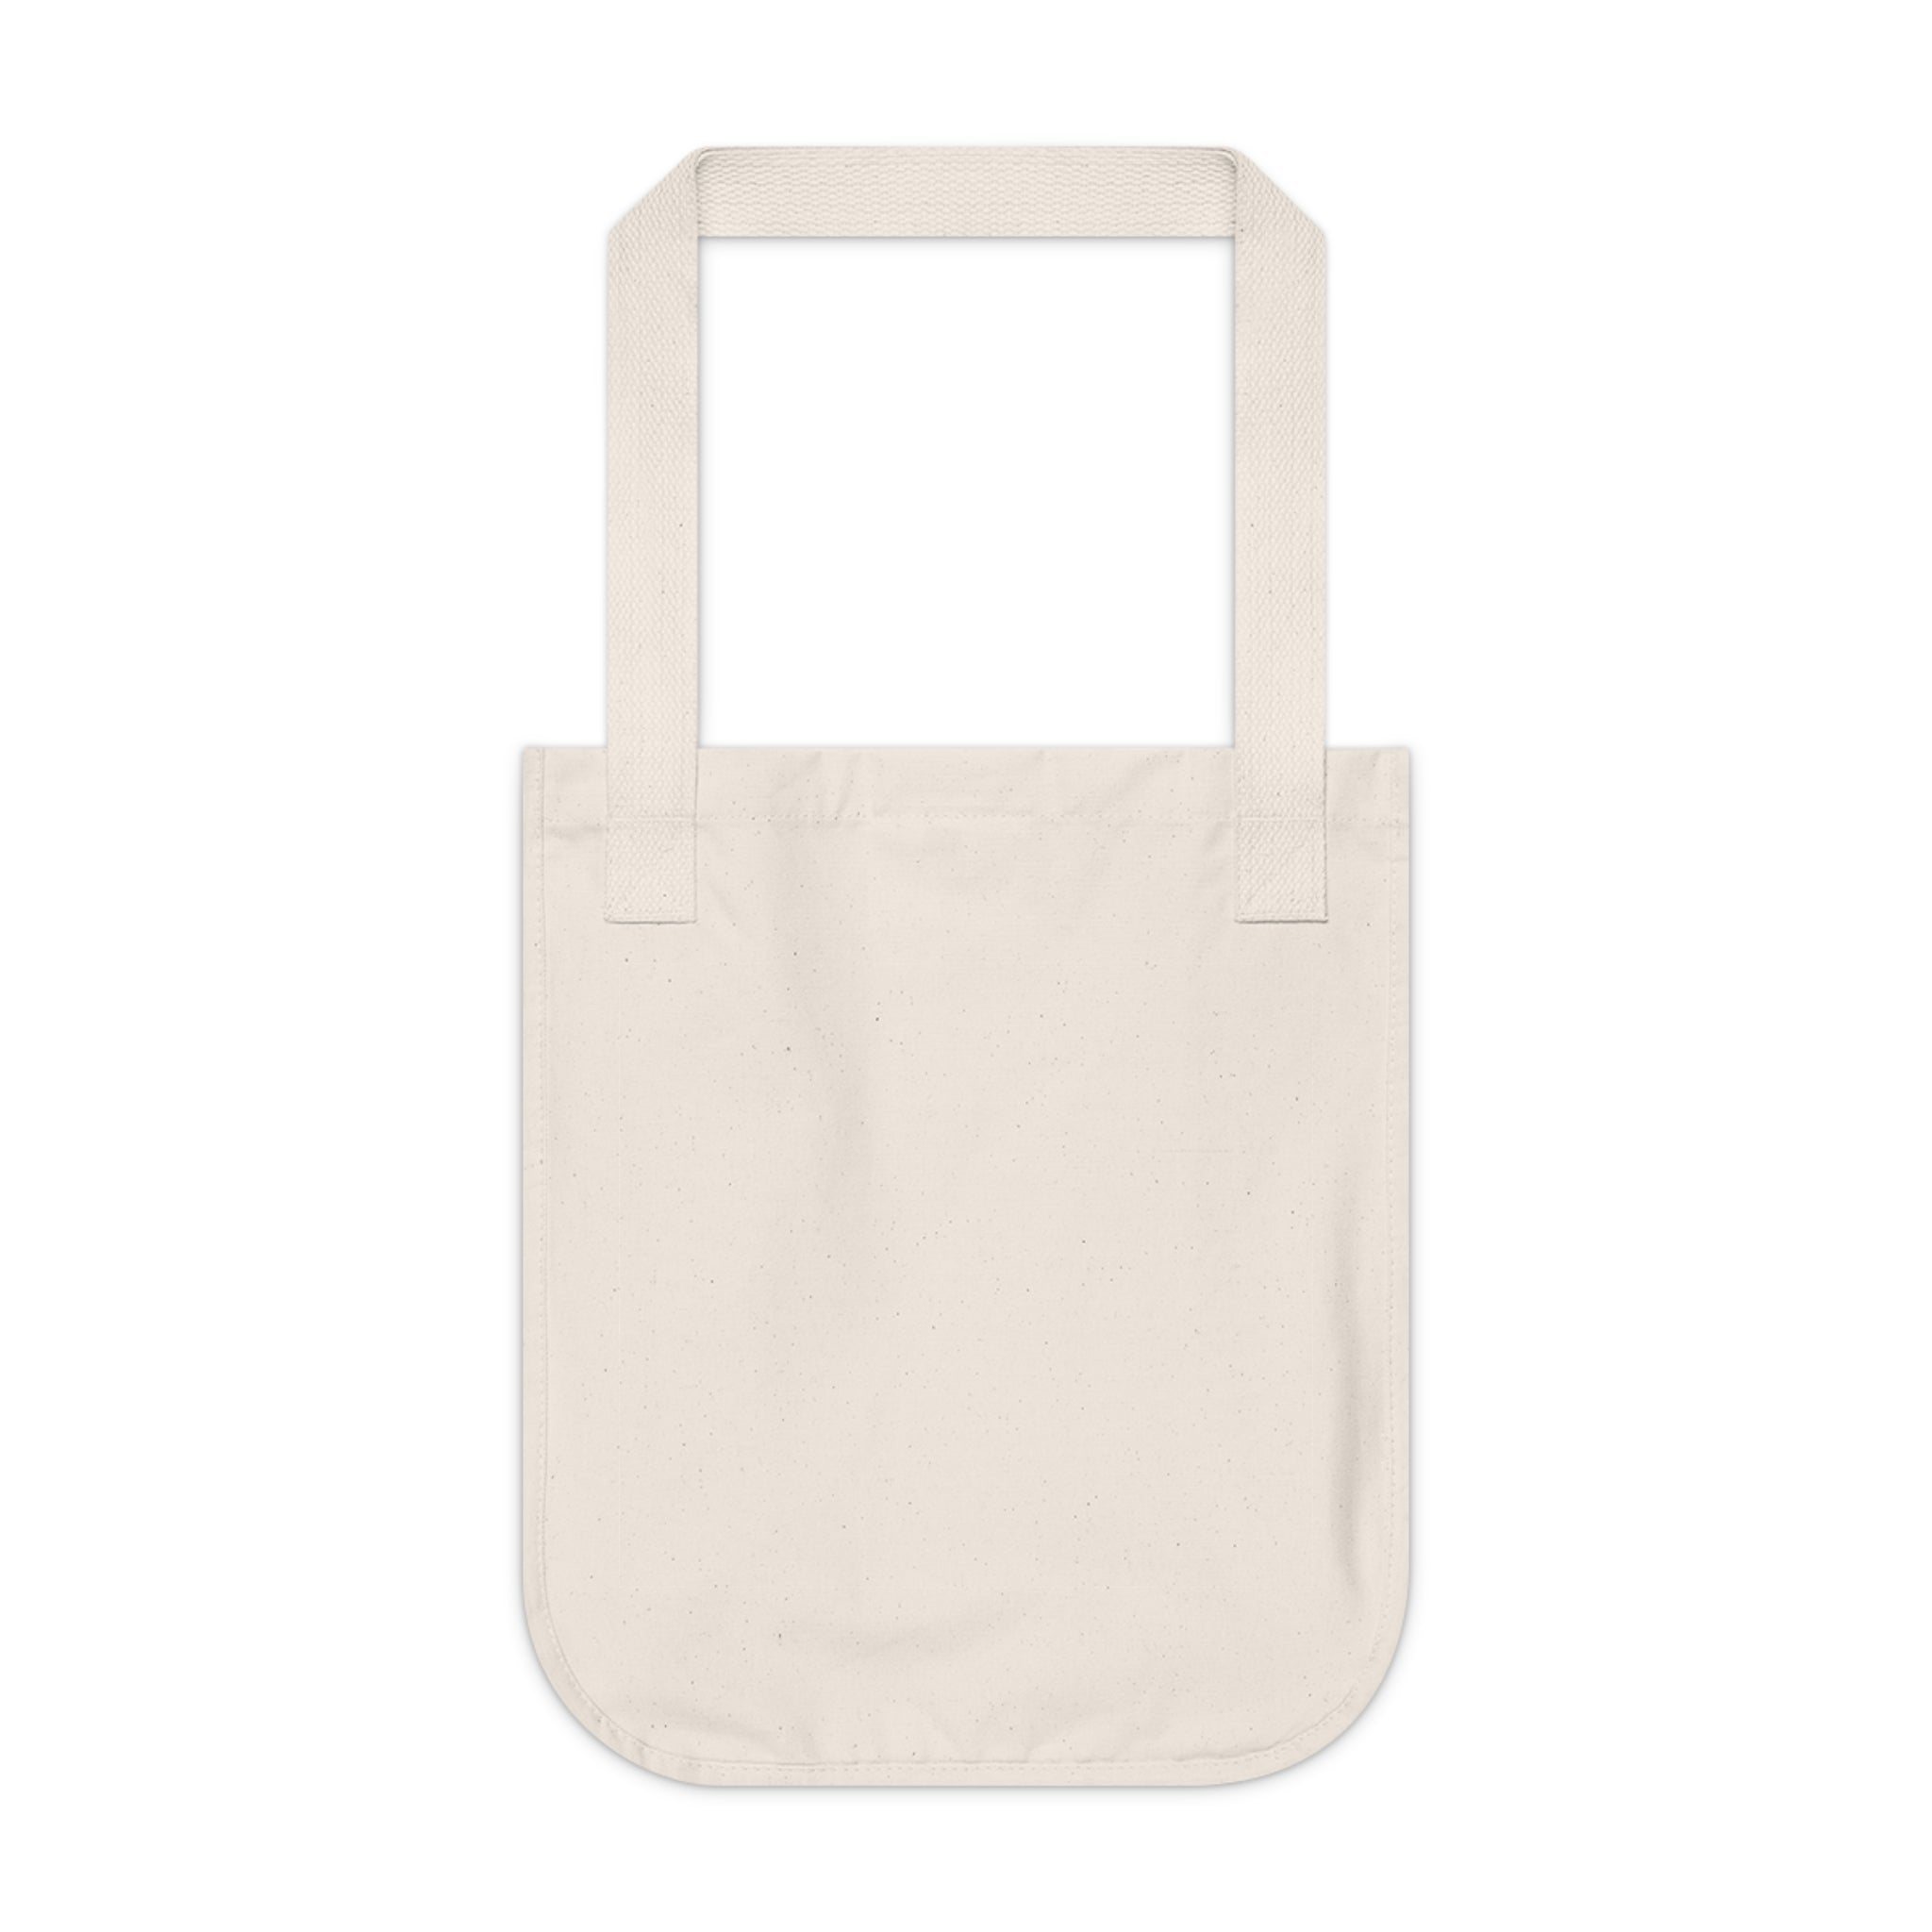 Organic Canvas Farmer Support Canvas Tote Shopping Bag | Free Shipping